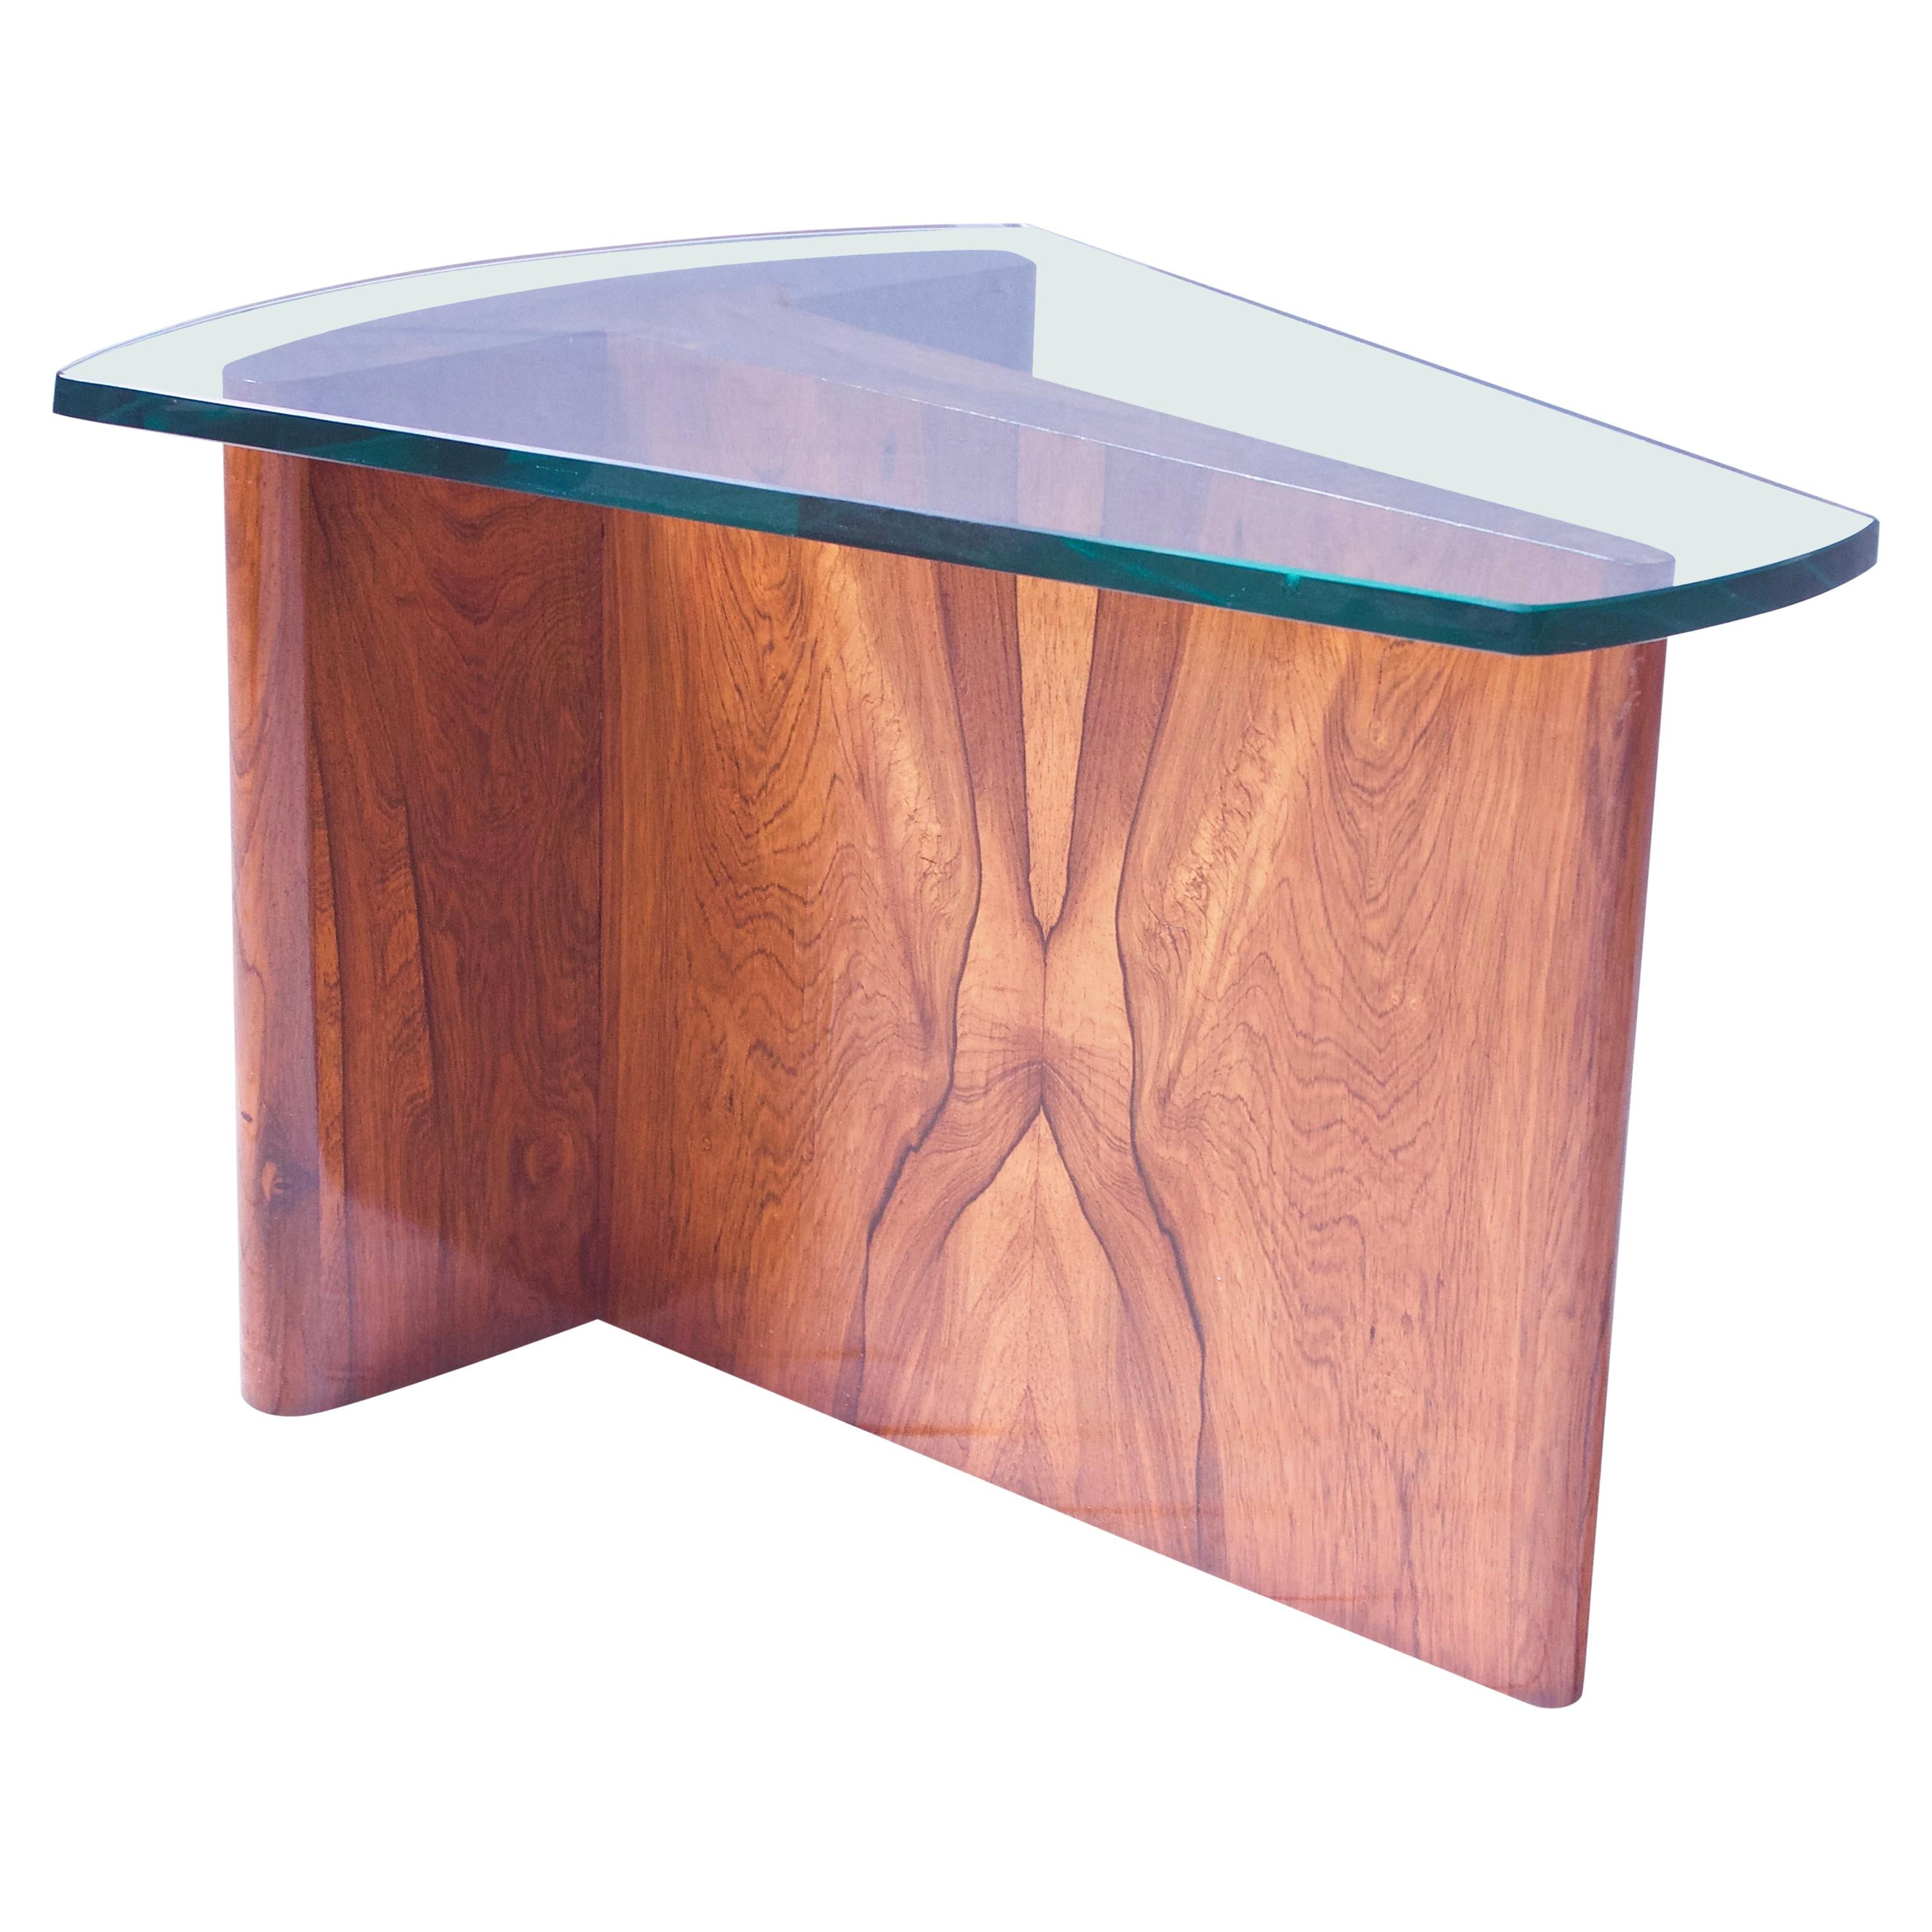 Sculptural Coffee Table in Italian Walnut with Beveled-Glass Top, Italy, 1960s